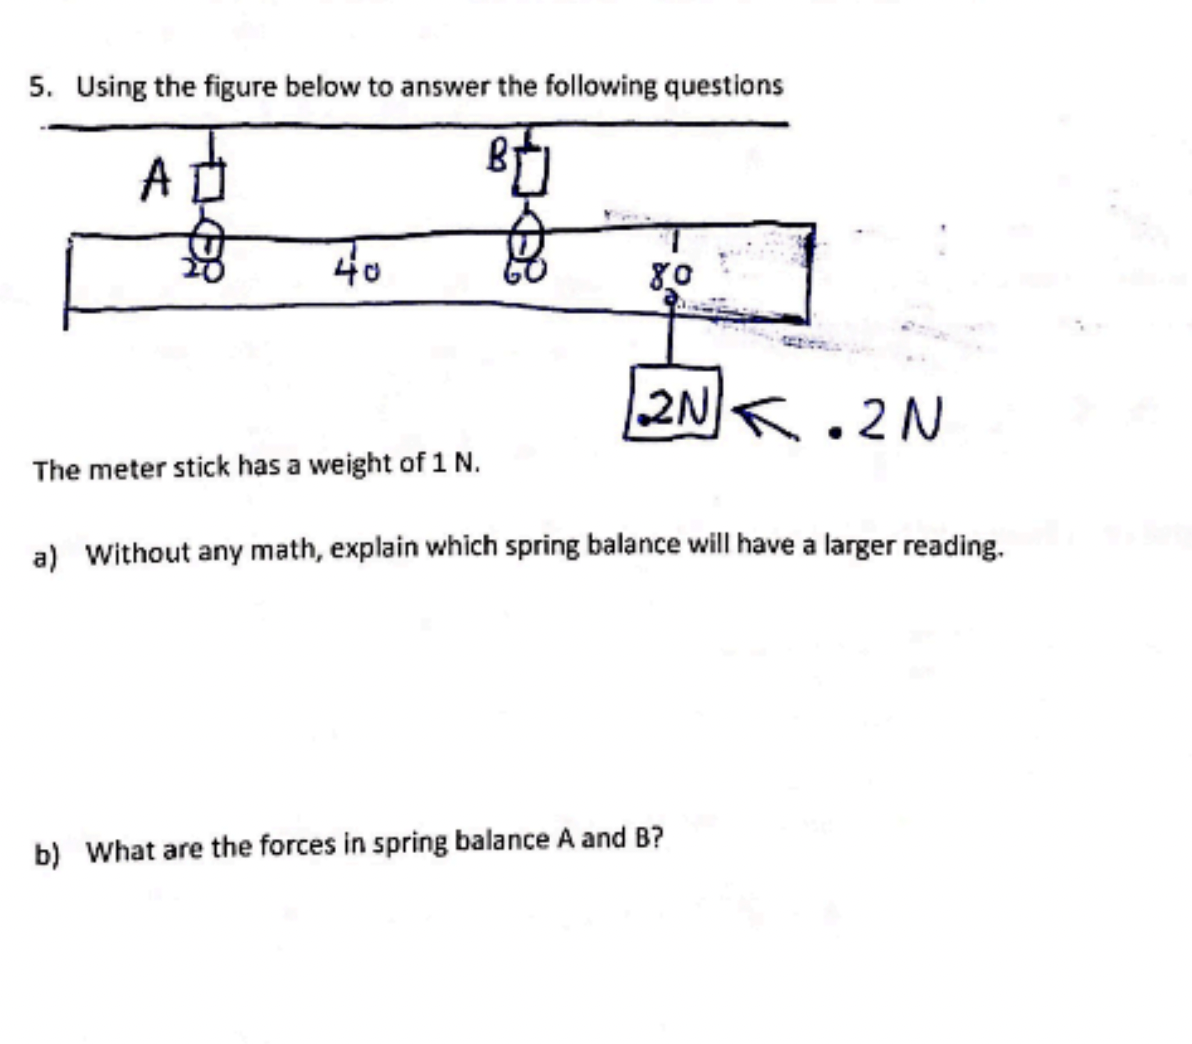 5. Using the figure below to answer the following questions
BU
A
40
80
2N2N
The meter stick has a weight of 1 N.
a) Without any math, explain which spring balance will have a larger reading.
b) What are the forces in spring balance A and B?